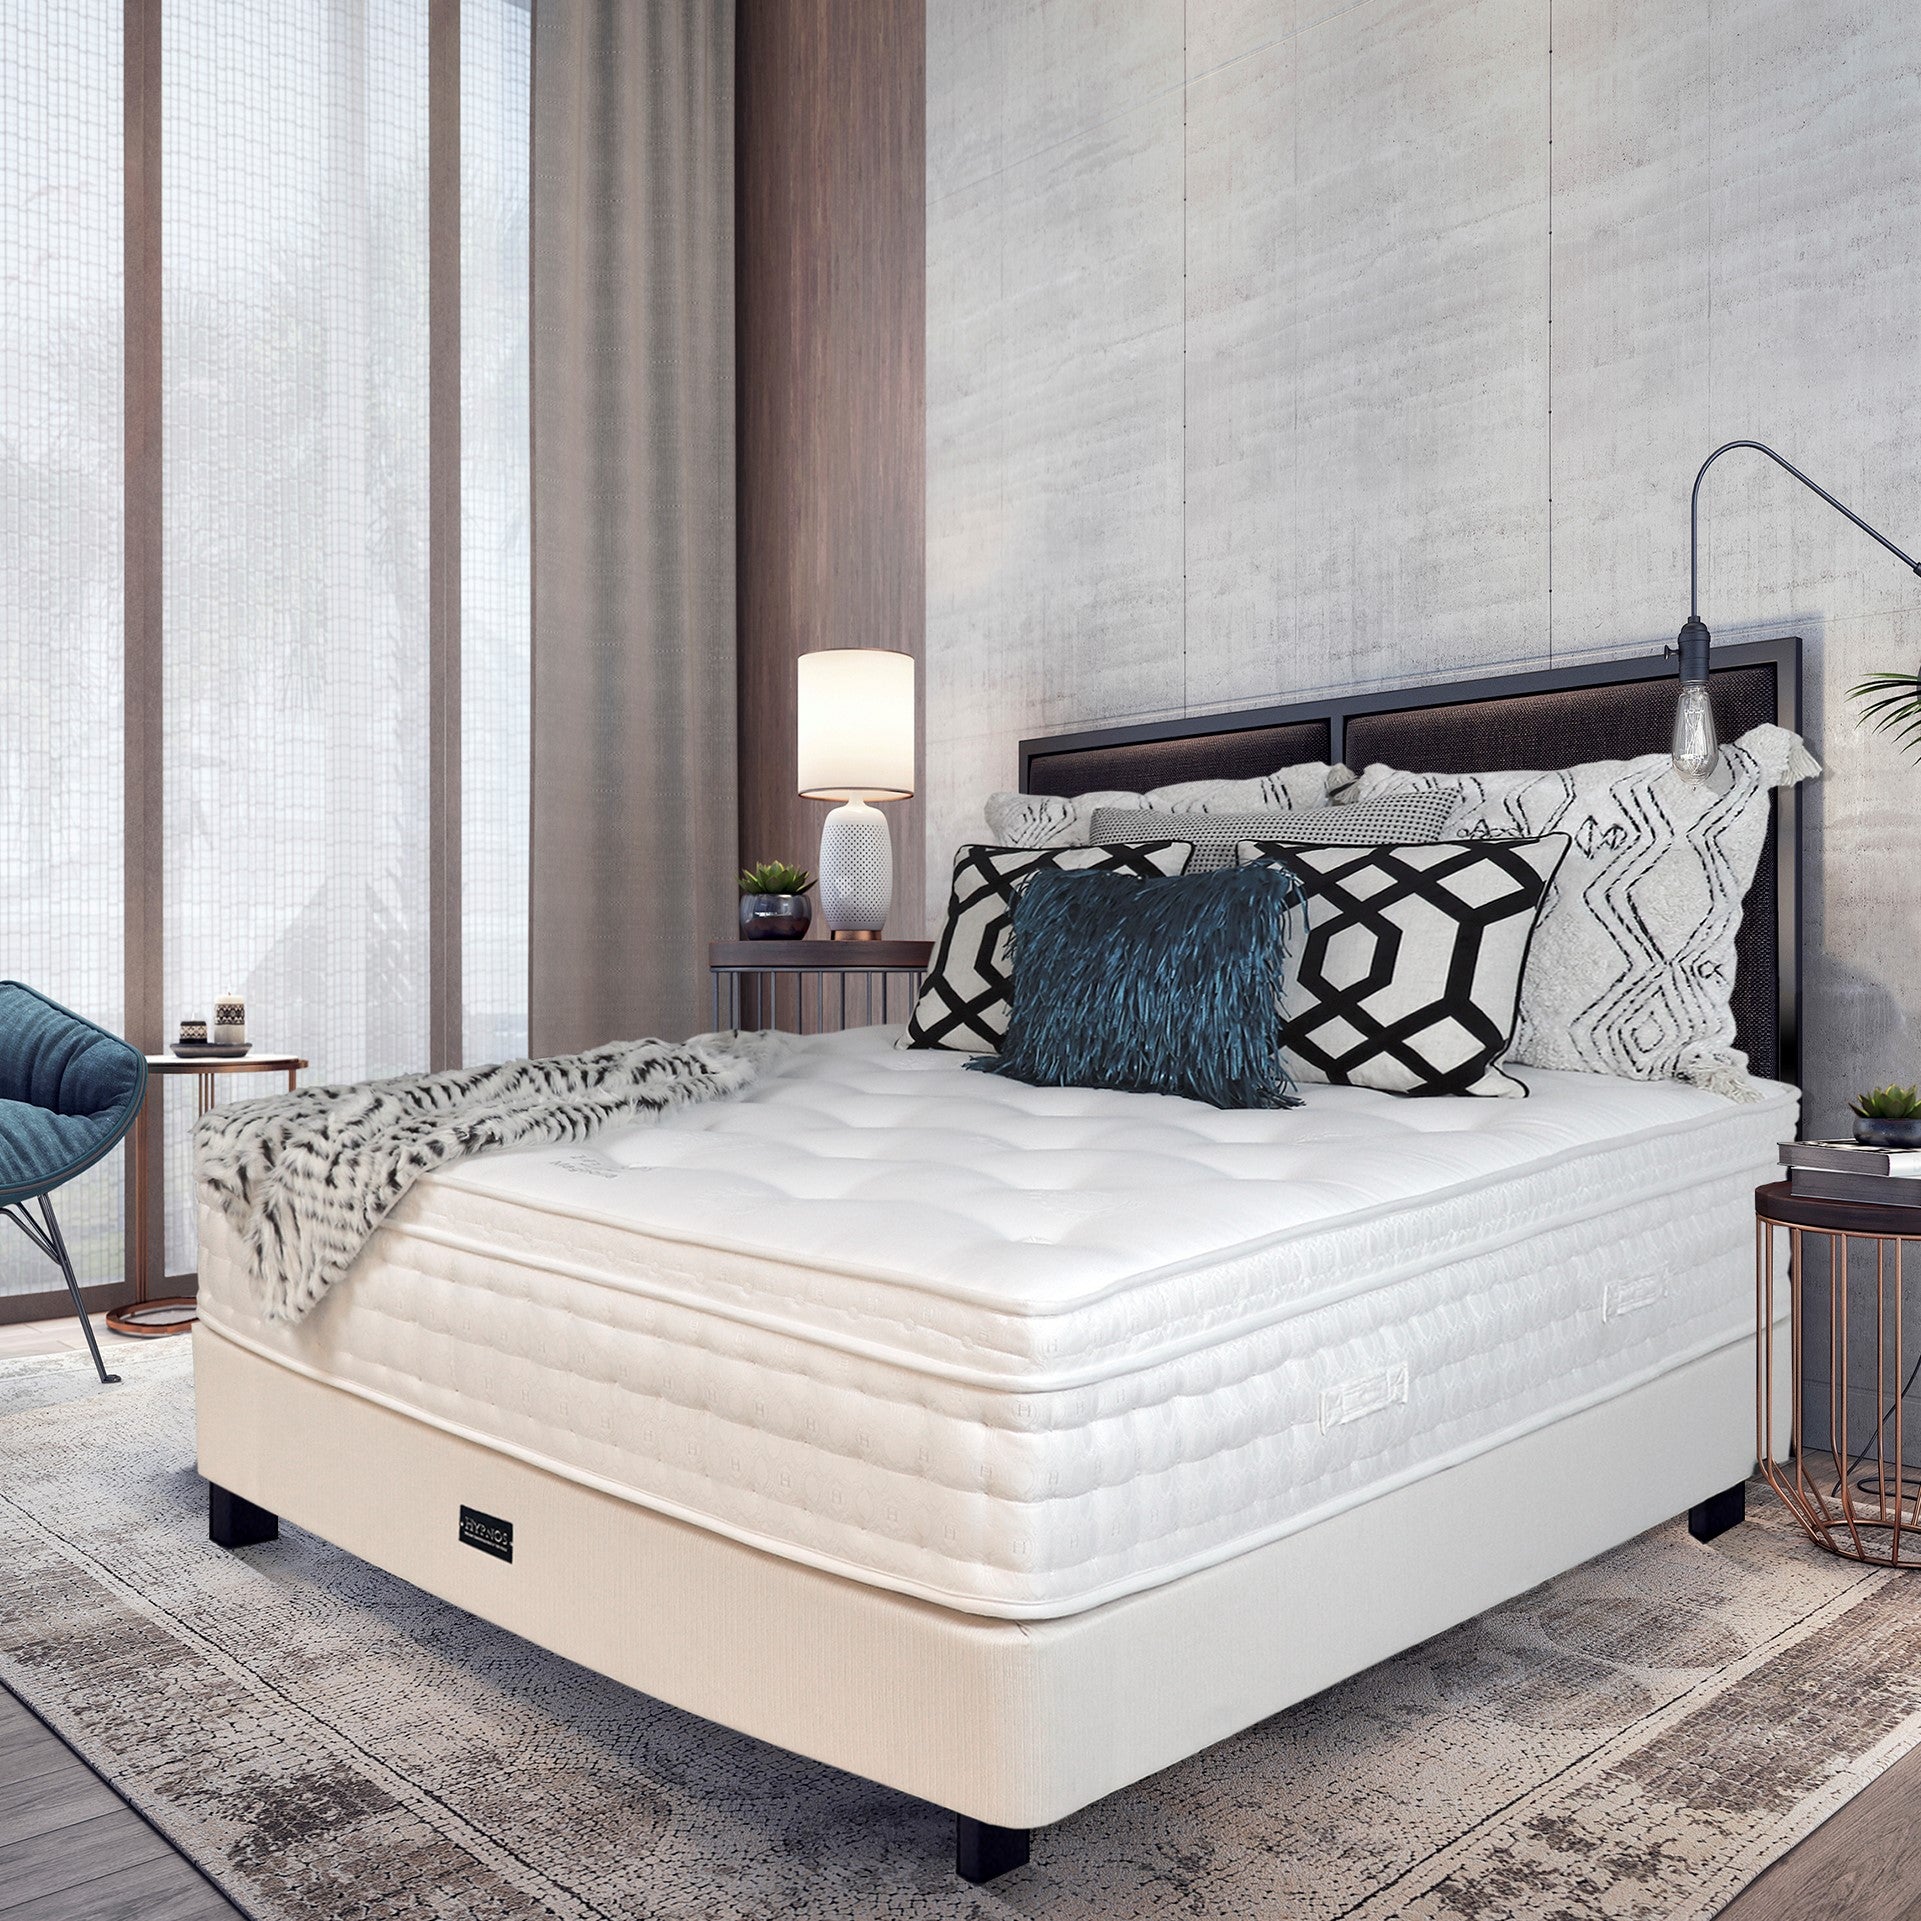 A Sleep Oasis: The Hypnos Magnolia Euro Top Mattress - Unrivaled Comfort and Luxury